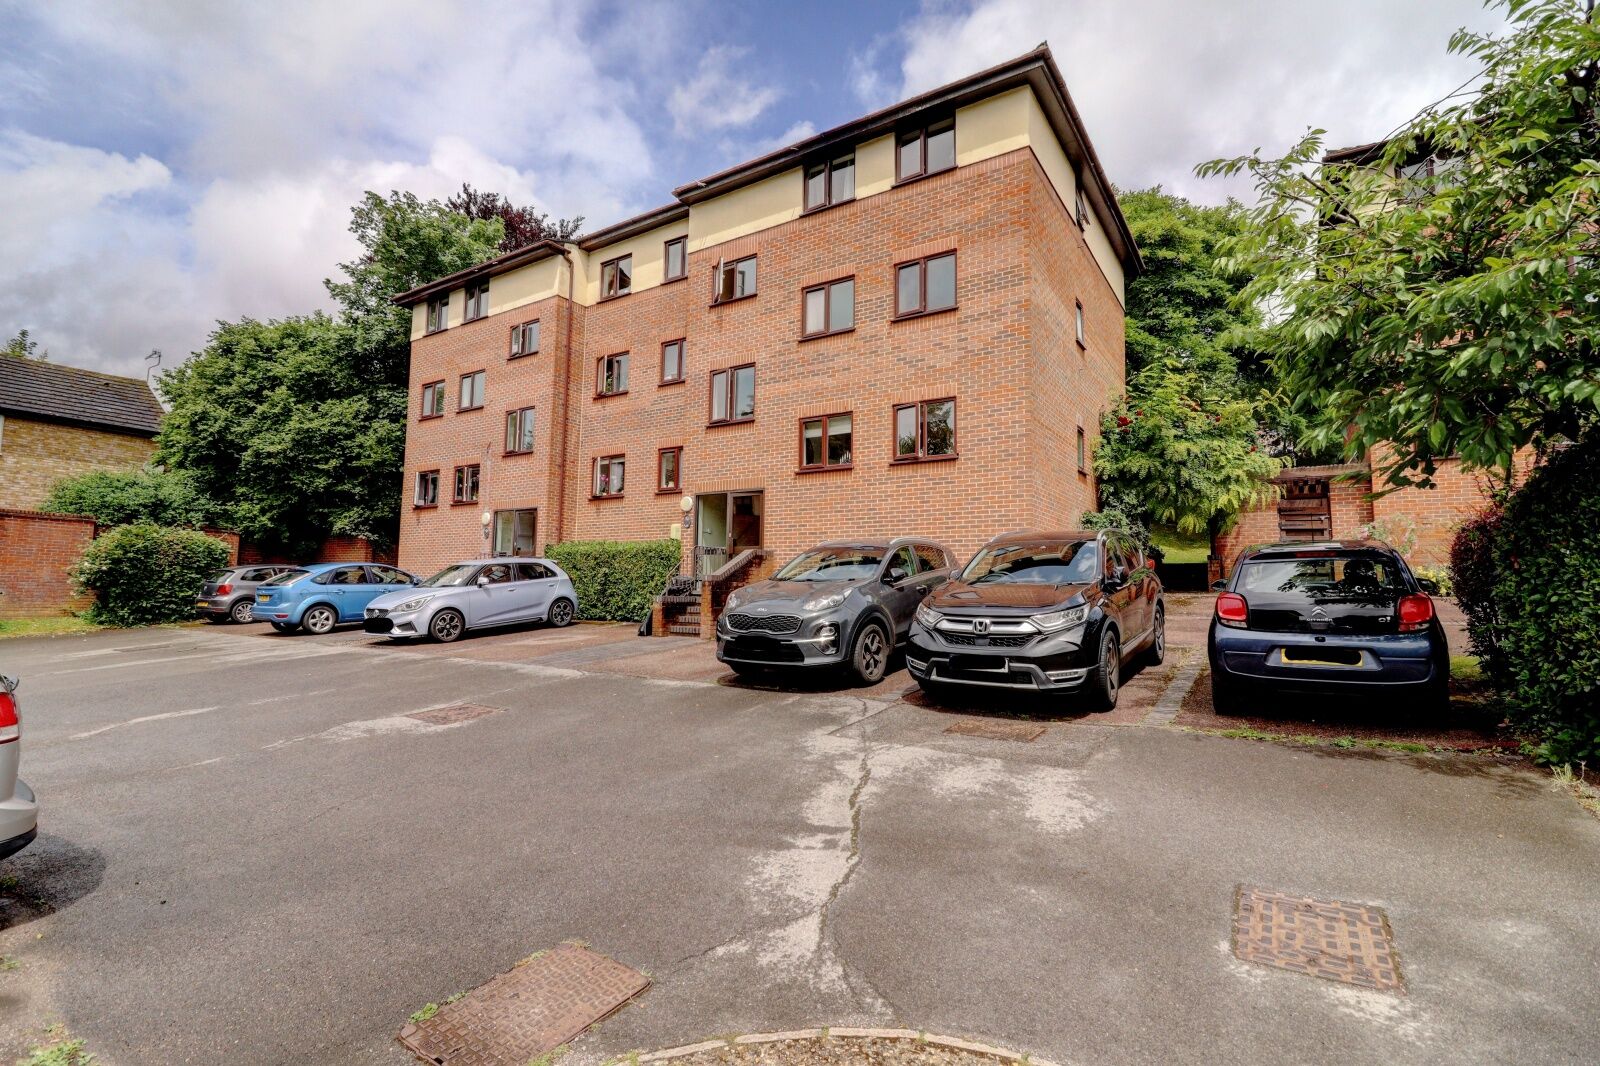 2 bedroom  flat for sale London Road, High Wycombe, HP11, main image